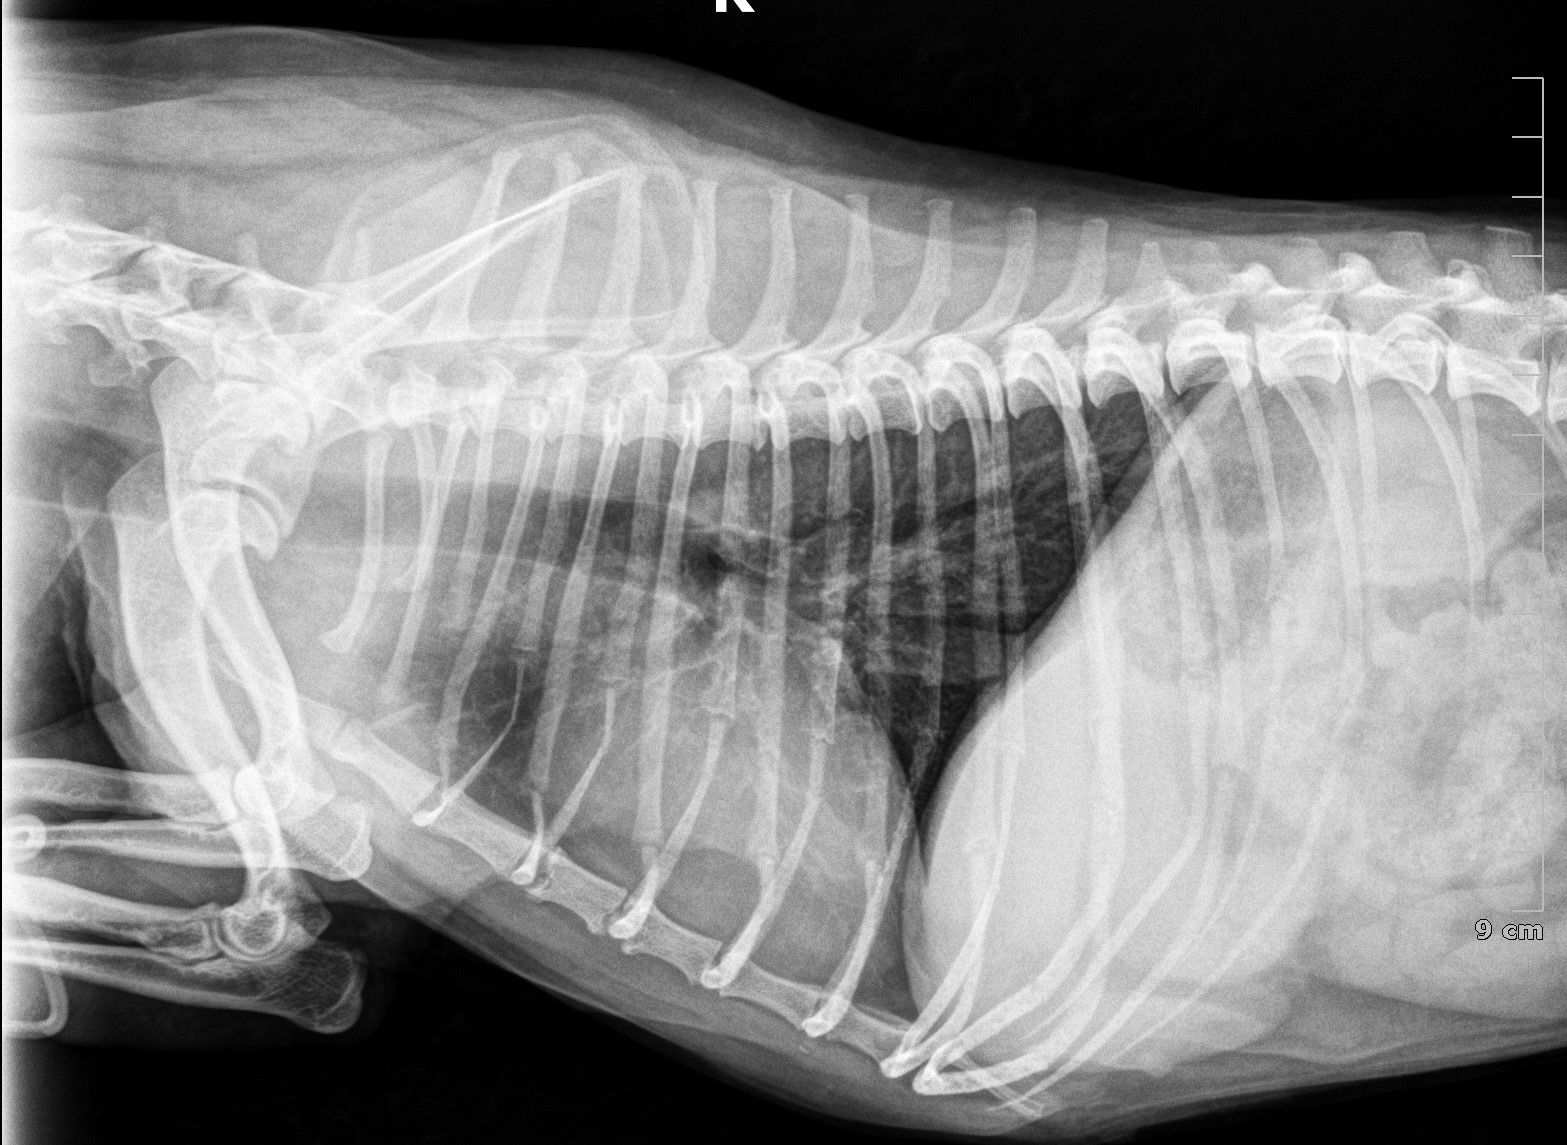 A chest x-ray before the operation